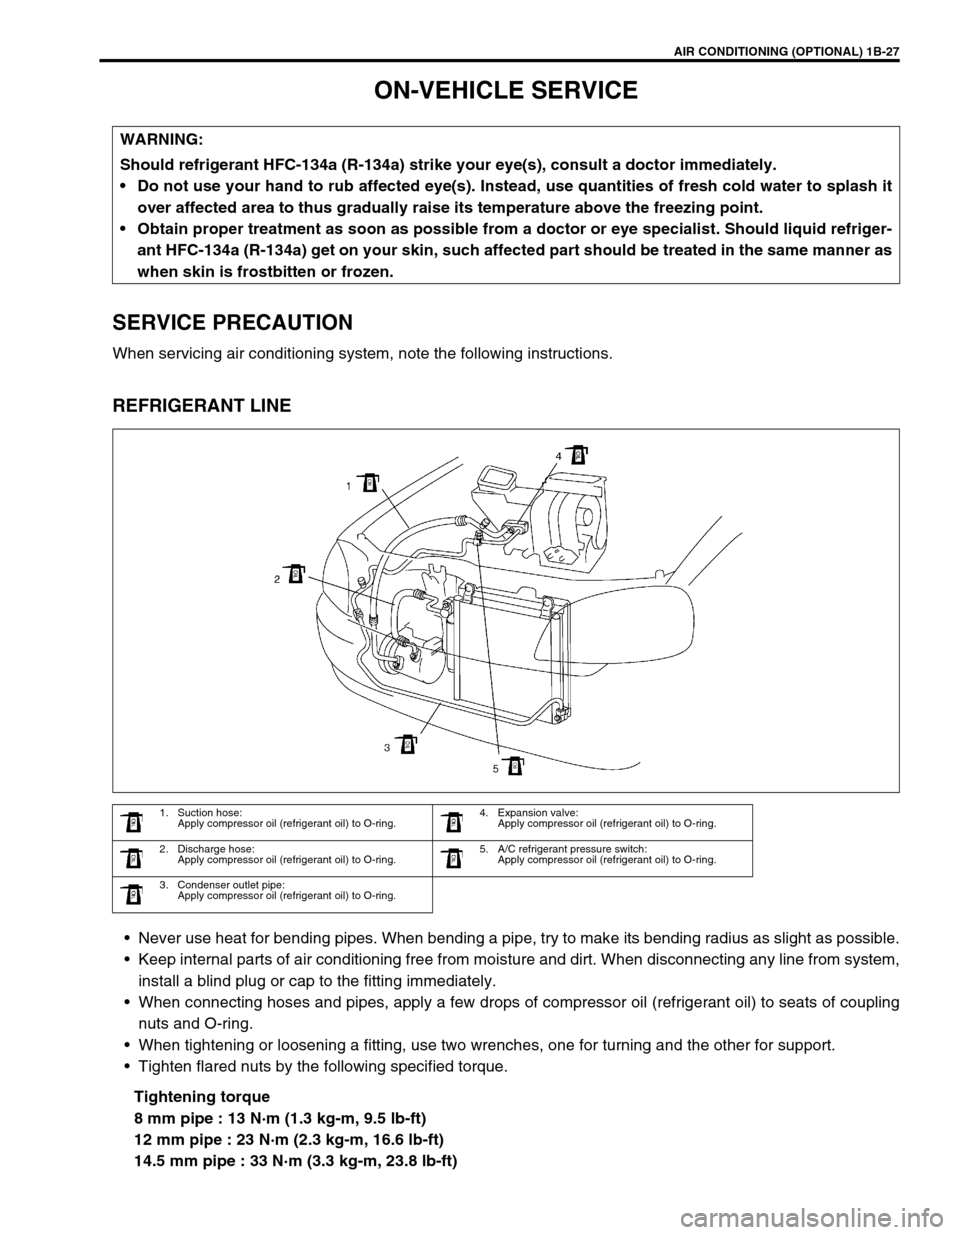 SUZUKI SWIFT 2000 1.G RG413 Service Workshop Manual AIR CONDITIONING (OPTIONAL) 1B-27
ON-VEHICLE SERVICE
SERVICE PRECAUTION
When servicing air conditioning system, note the following instructions.
REFRIGERANT LINE
Never use heat for bending pipes. Whe